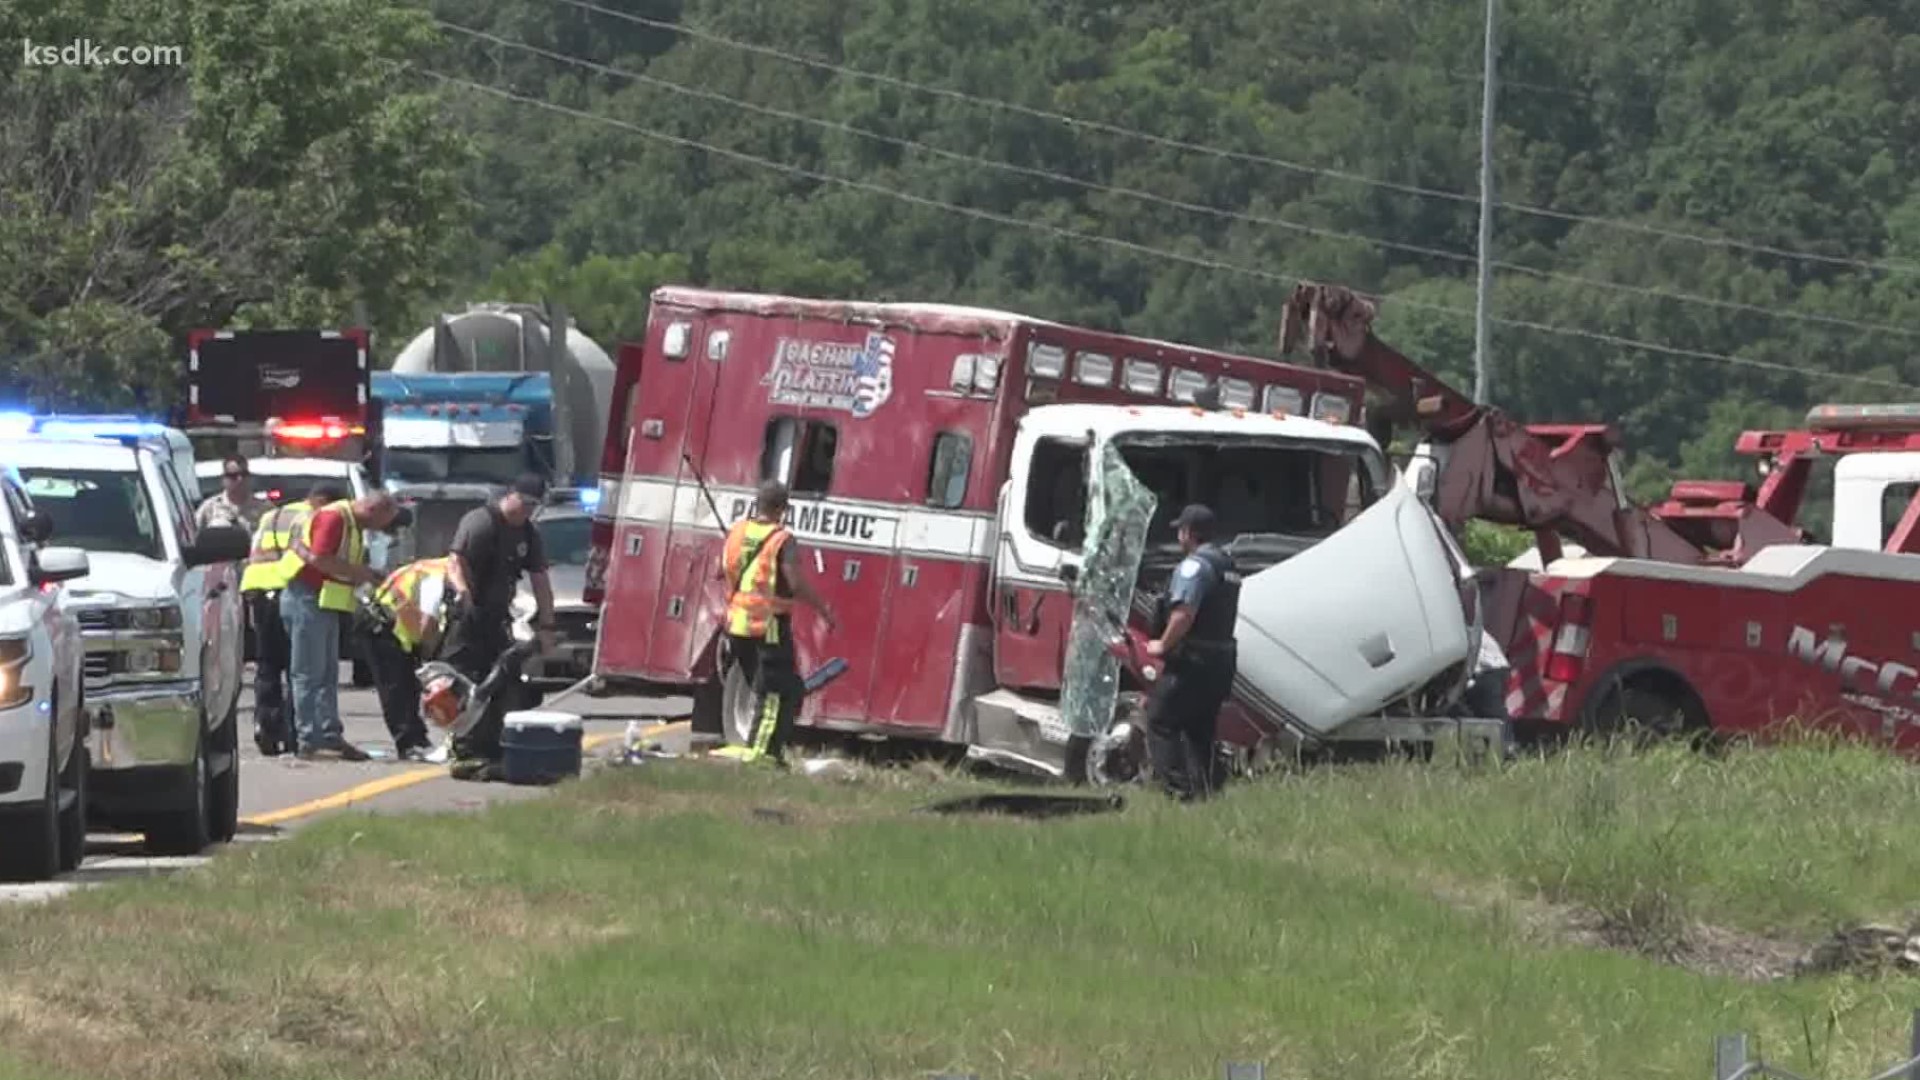 A medical helicopter landed on the highway around 30 minutes after the crash was reported